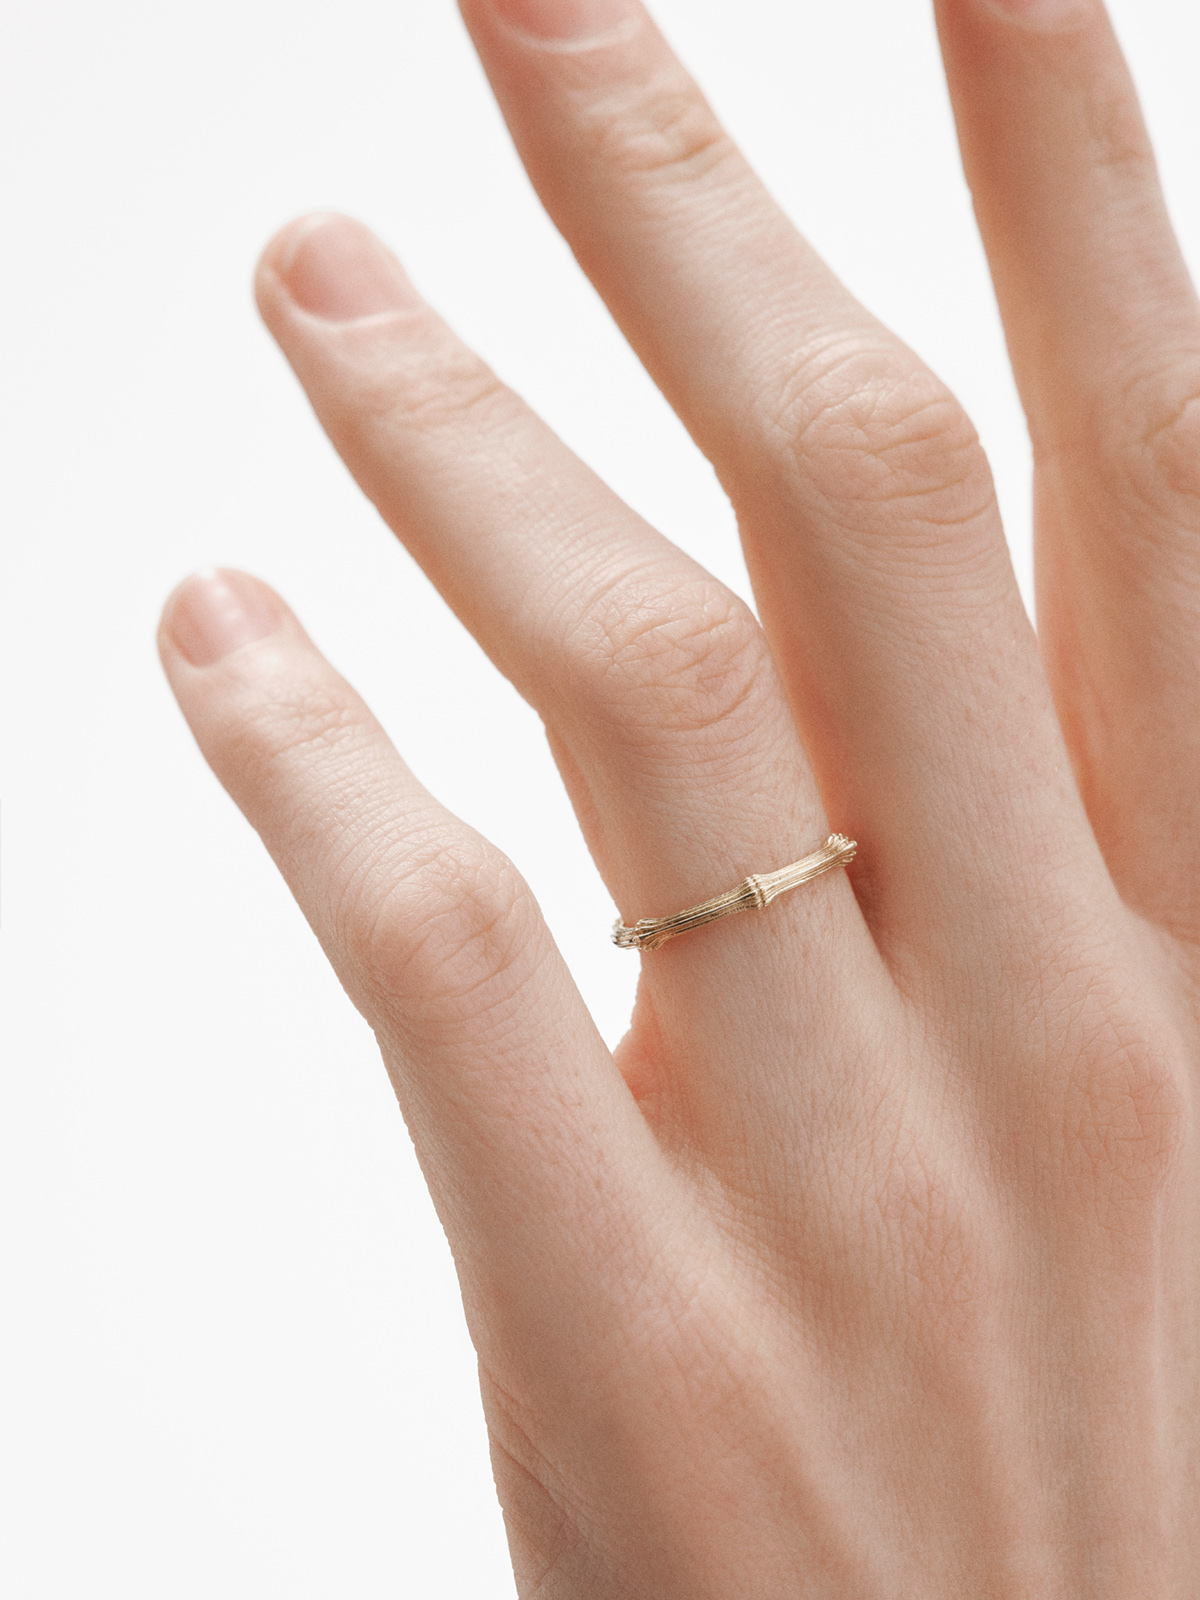 9K Yellow Gold Ring with Bamboo Texture